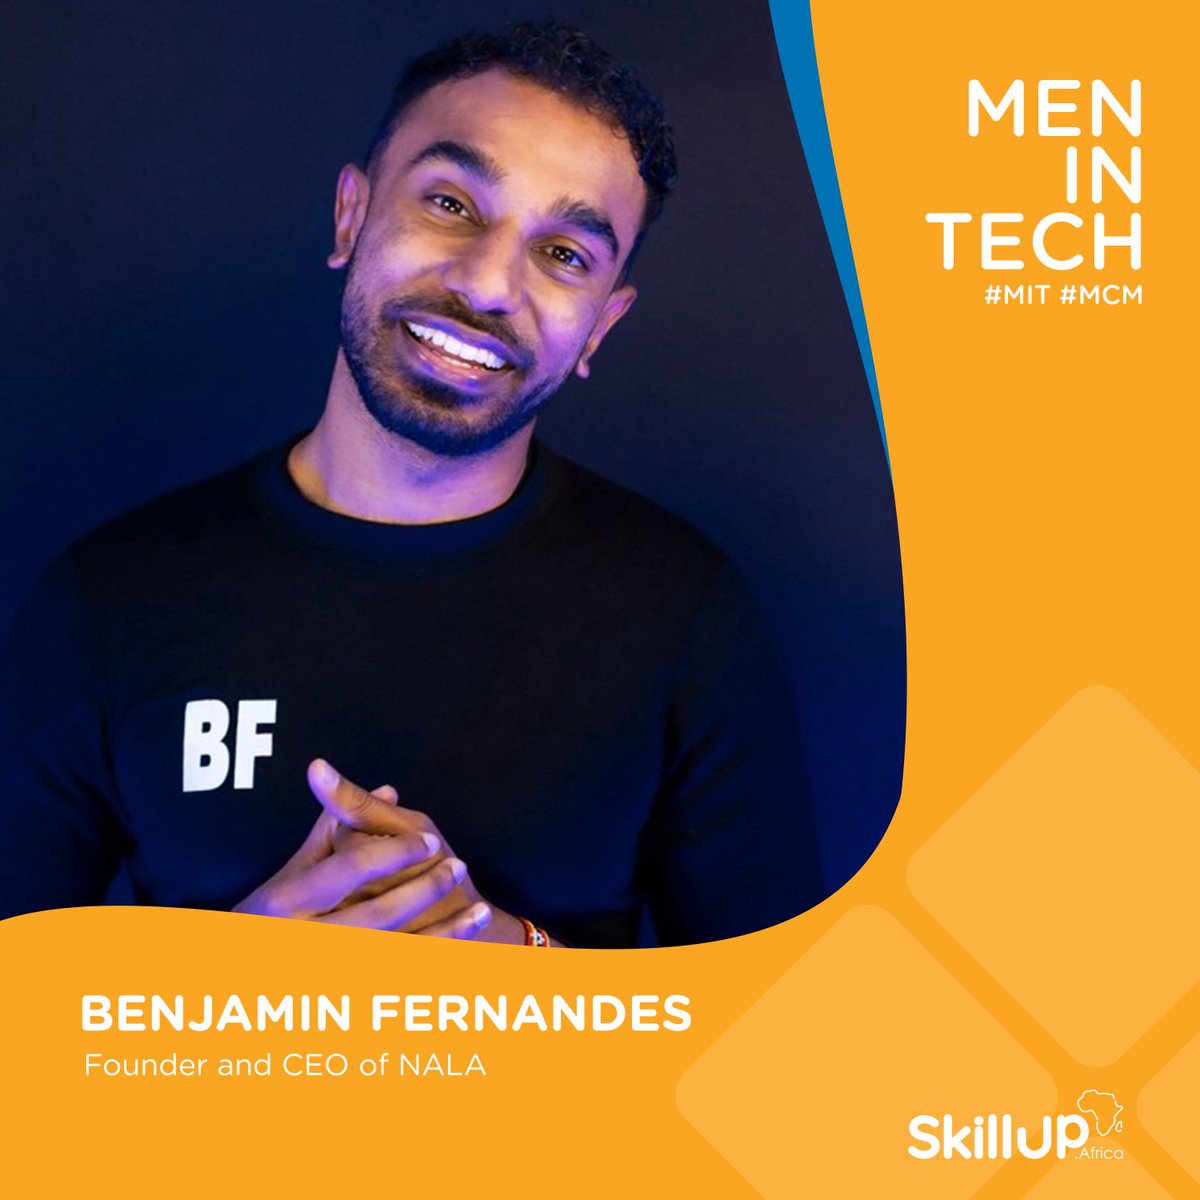 Meet our Men In Tech Feature, Benjamin Fernandes

Benjamin is the Founder and CEO of NALA, a Y-Combinator '19 financial services platform dedicated to building payments for the next billion users in Africa. With a passion for people, technology, and design,